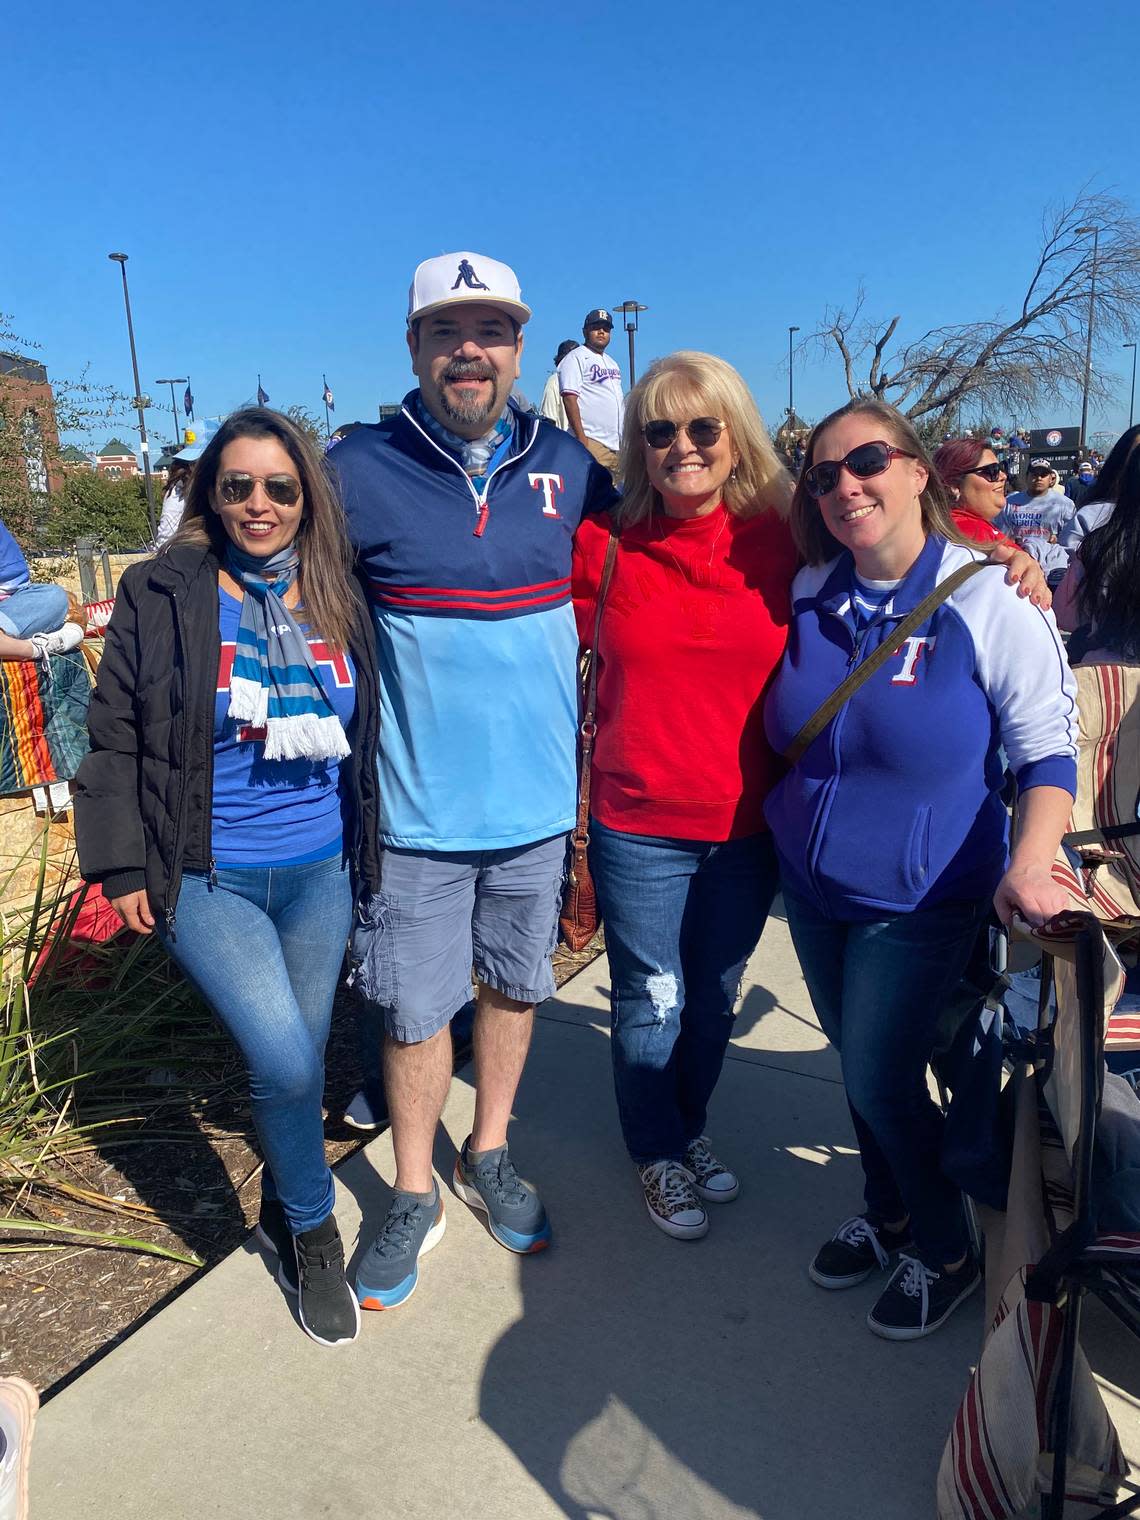 From left to right, Rangers fans Alex Saldivar, Ale Juarez, Kitty Wade and Mandy Cook are decked out in red and blue before the World Series victory parade. Jenny Rudolph